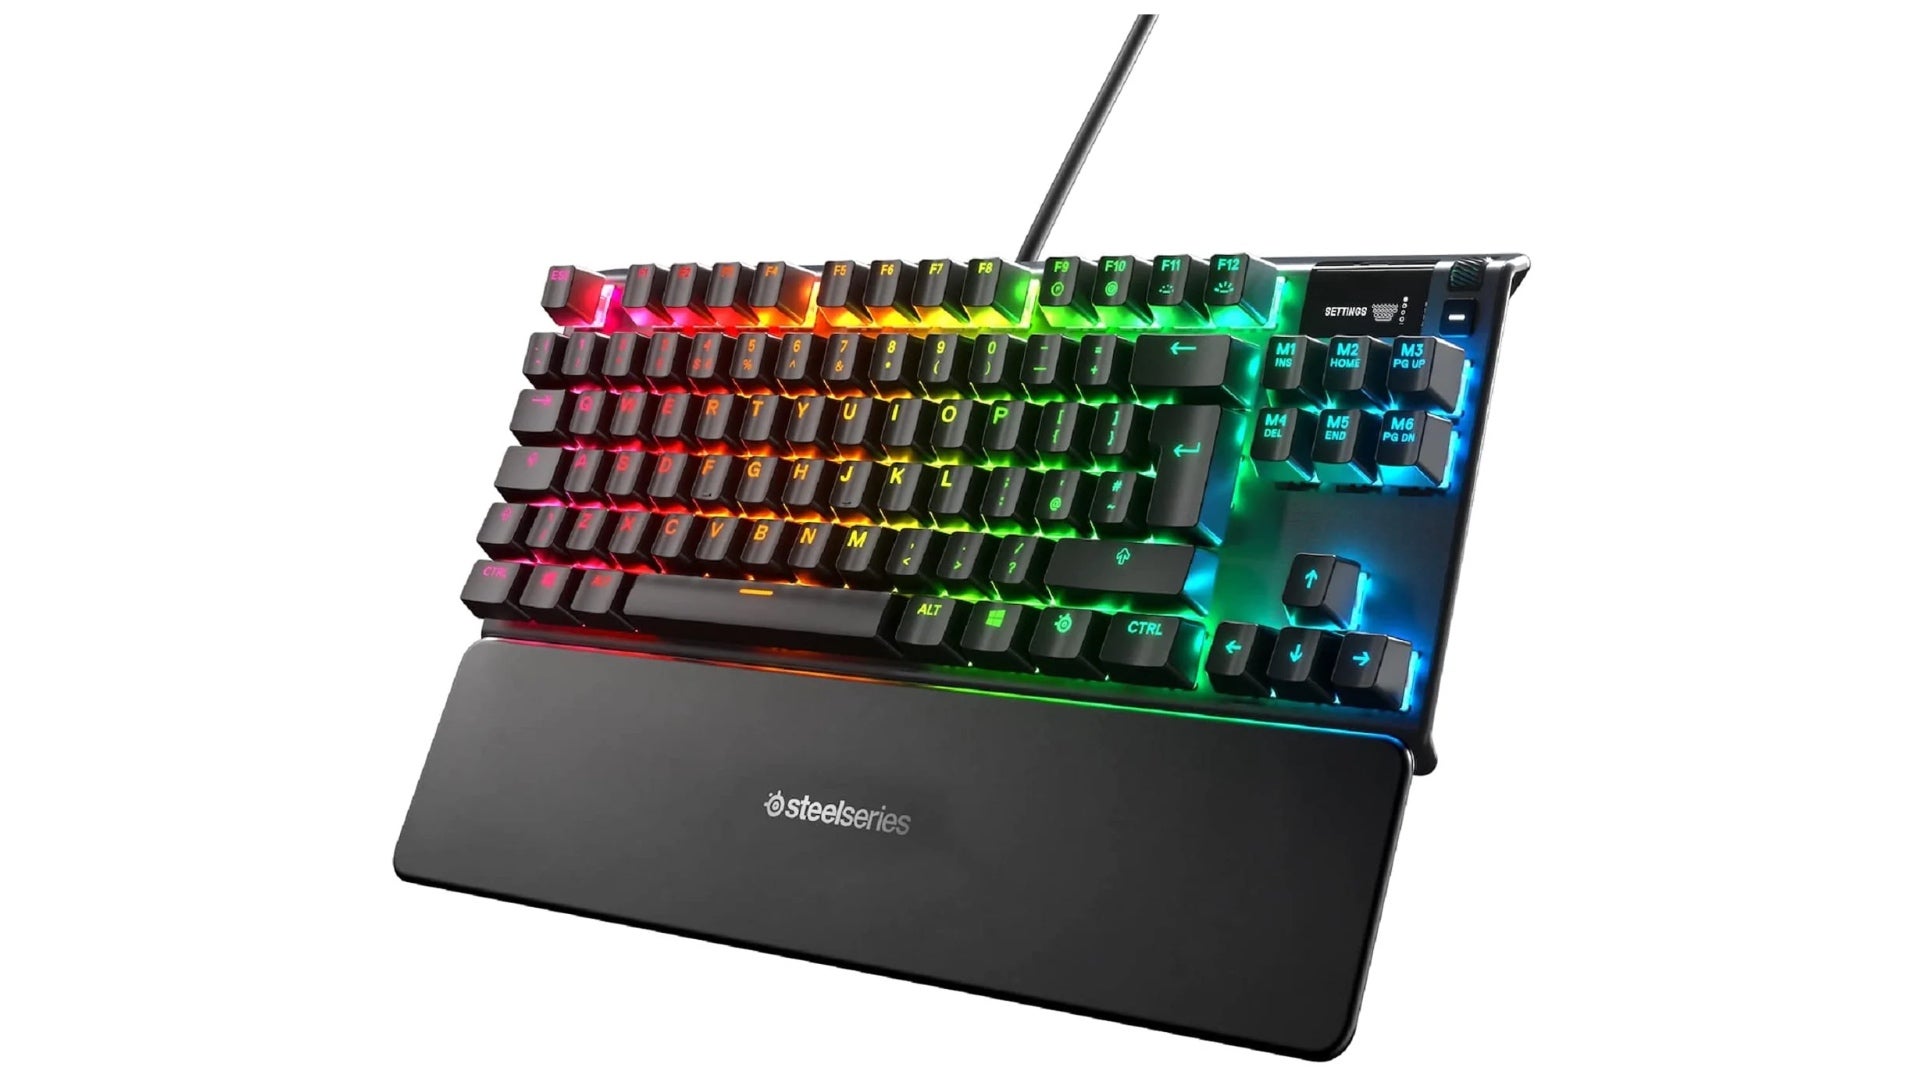 Save £70 on SteelSeries' Apex Pro TKL keyboard from Currys in this